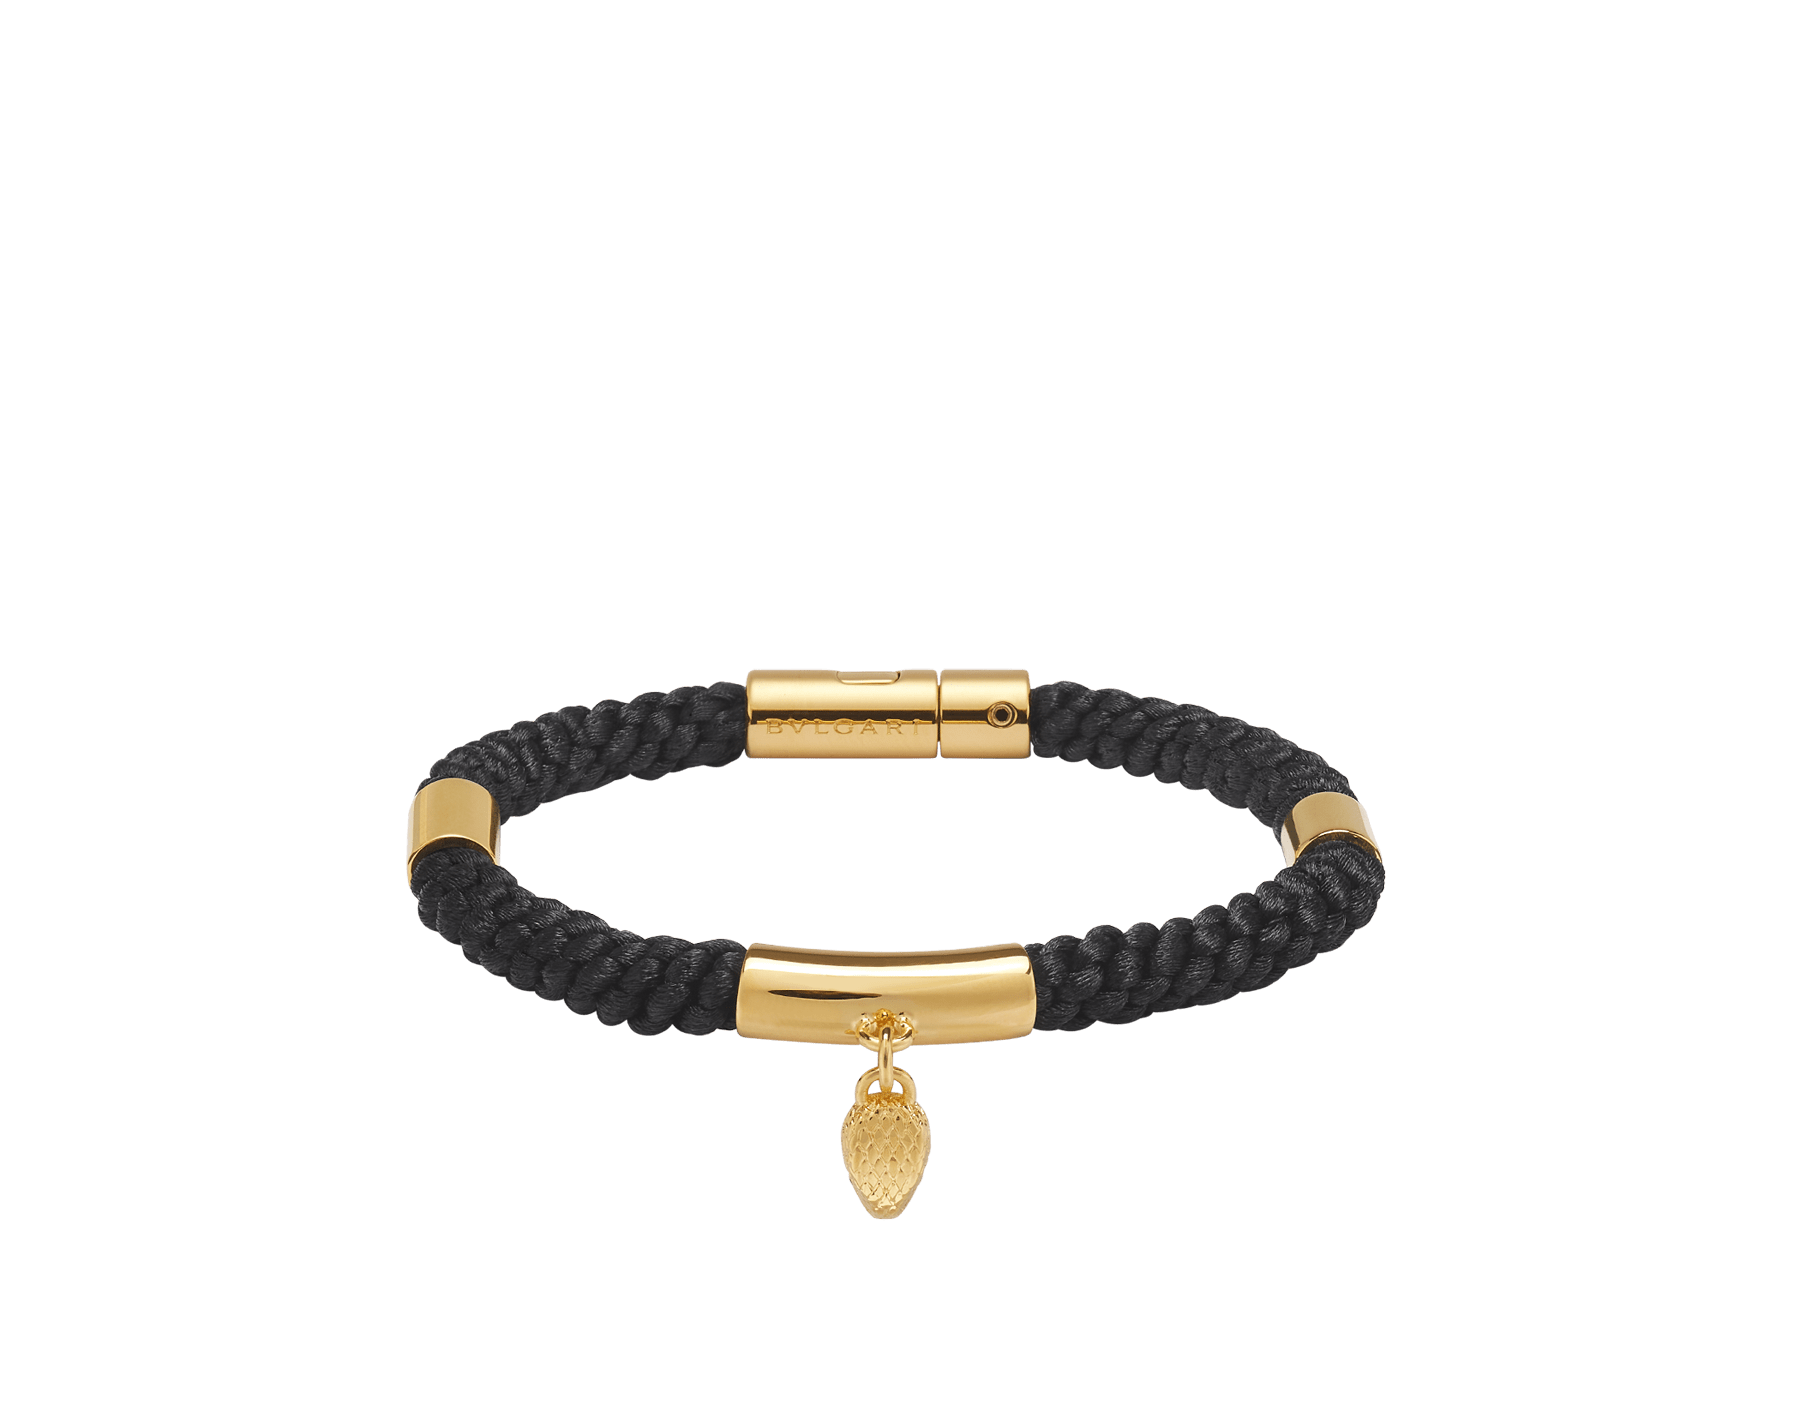 Serpenti Forever bracelet in black woven fabric. Captivating snakehead charm in gold-plated brass embellished with red enamel eyes, and press-stud closure. SERPMULTISTRING-WF-B image 1